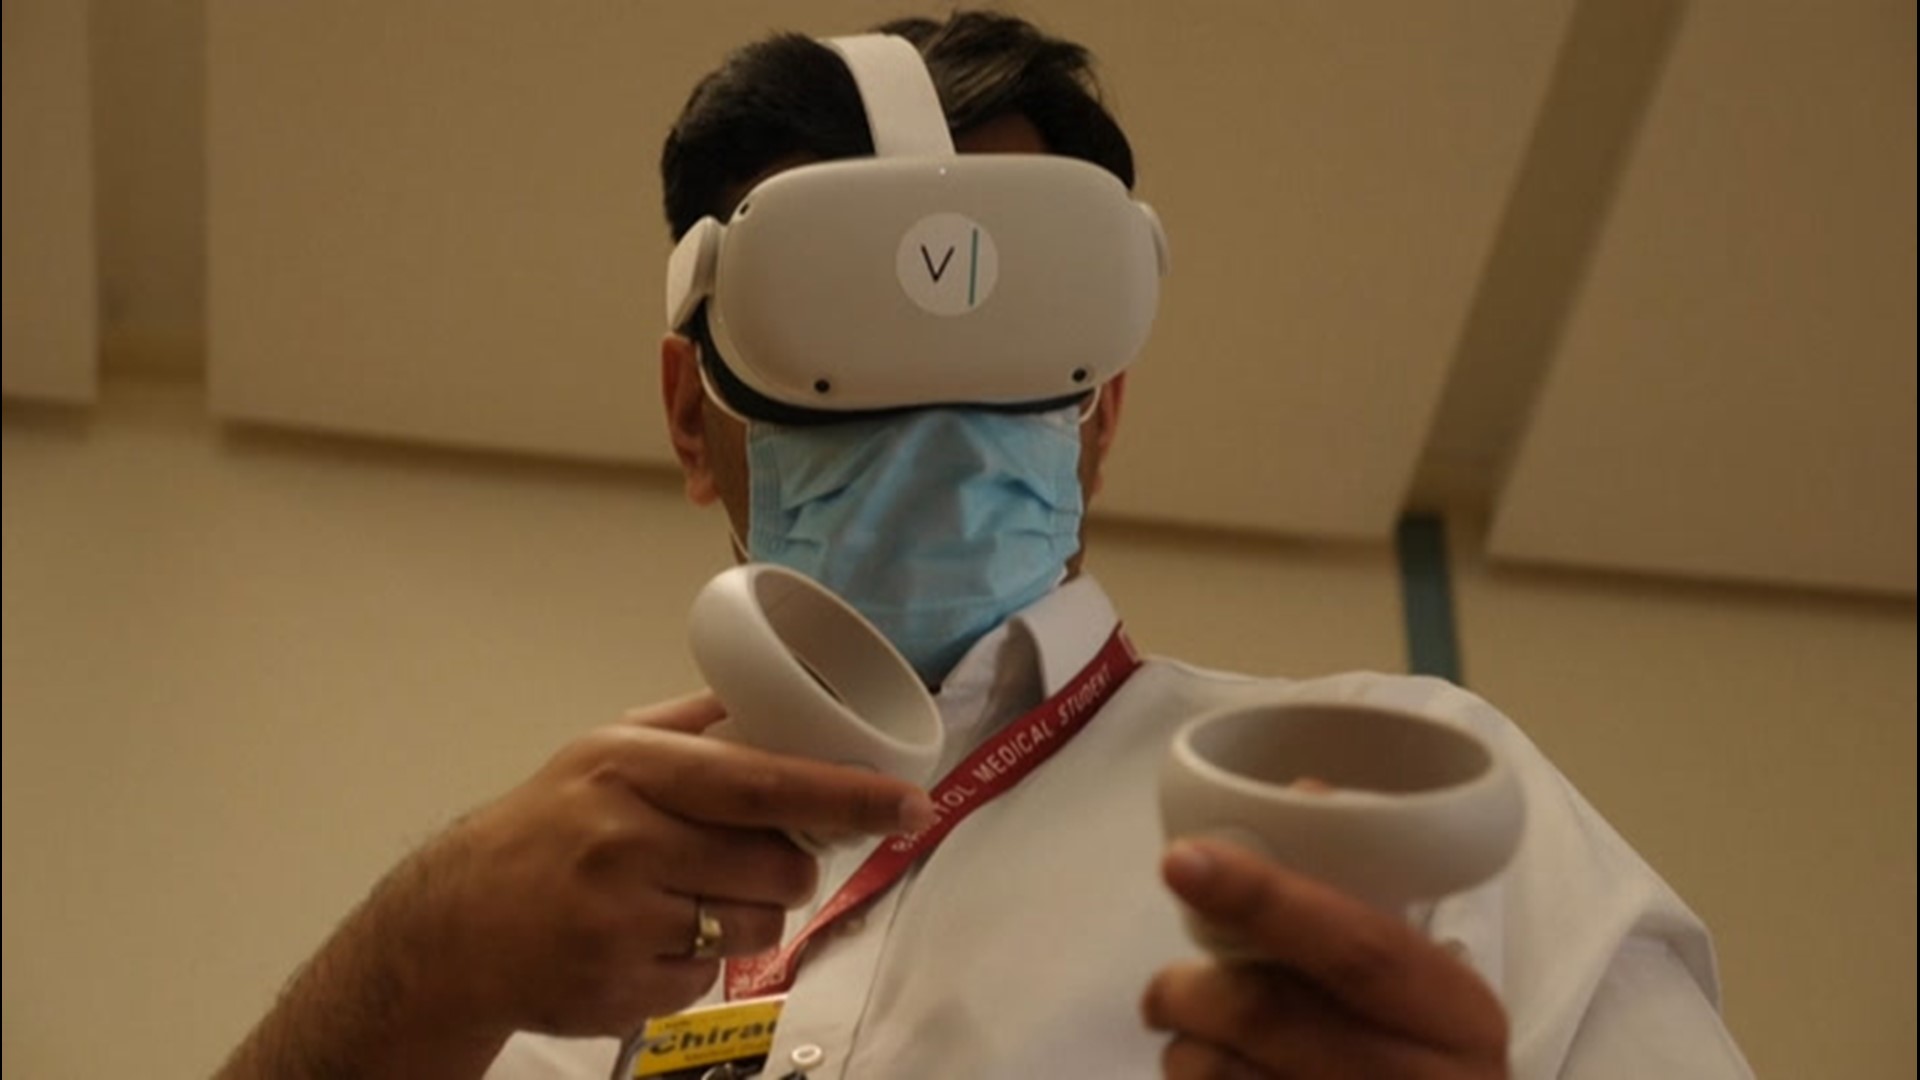 Medical students at Musgrove Hospital in Taunton, England, are training by using virtual reality. COVID-19 restrictions have made it difficult to gain experience in the medical theater, and VR is a tool being used to get around that.